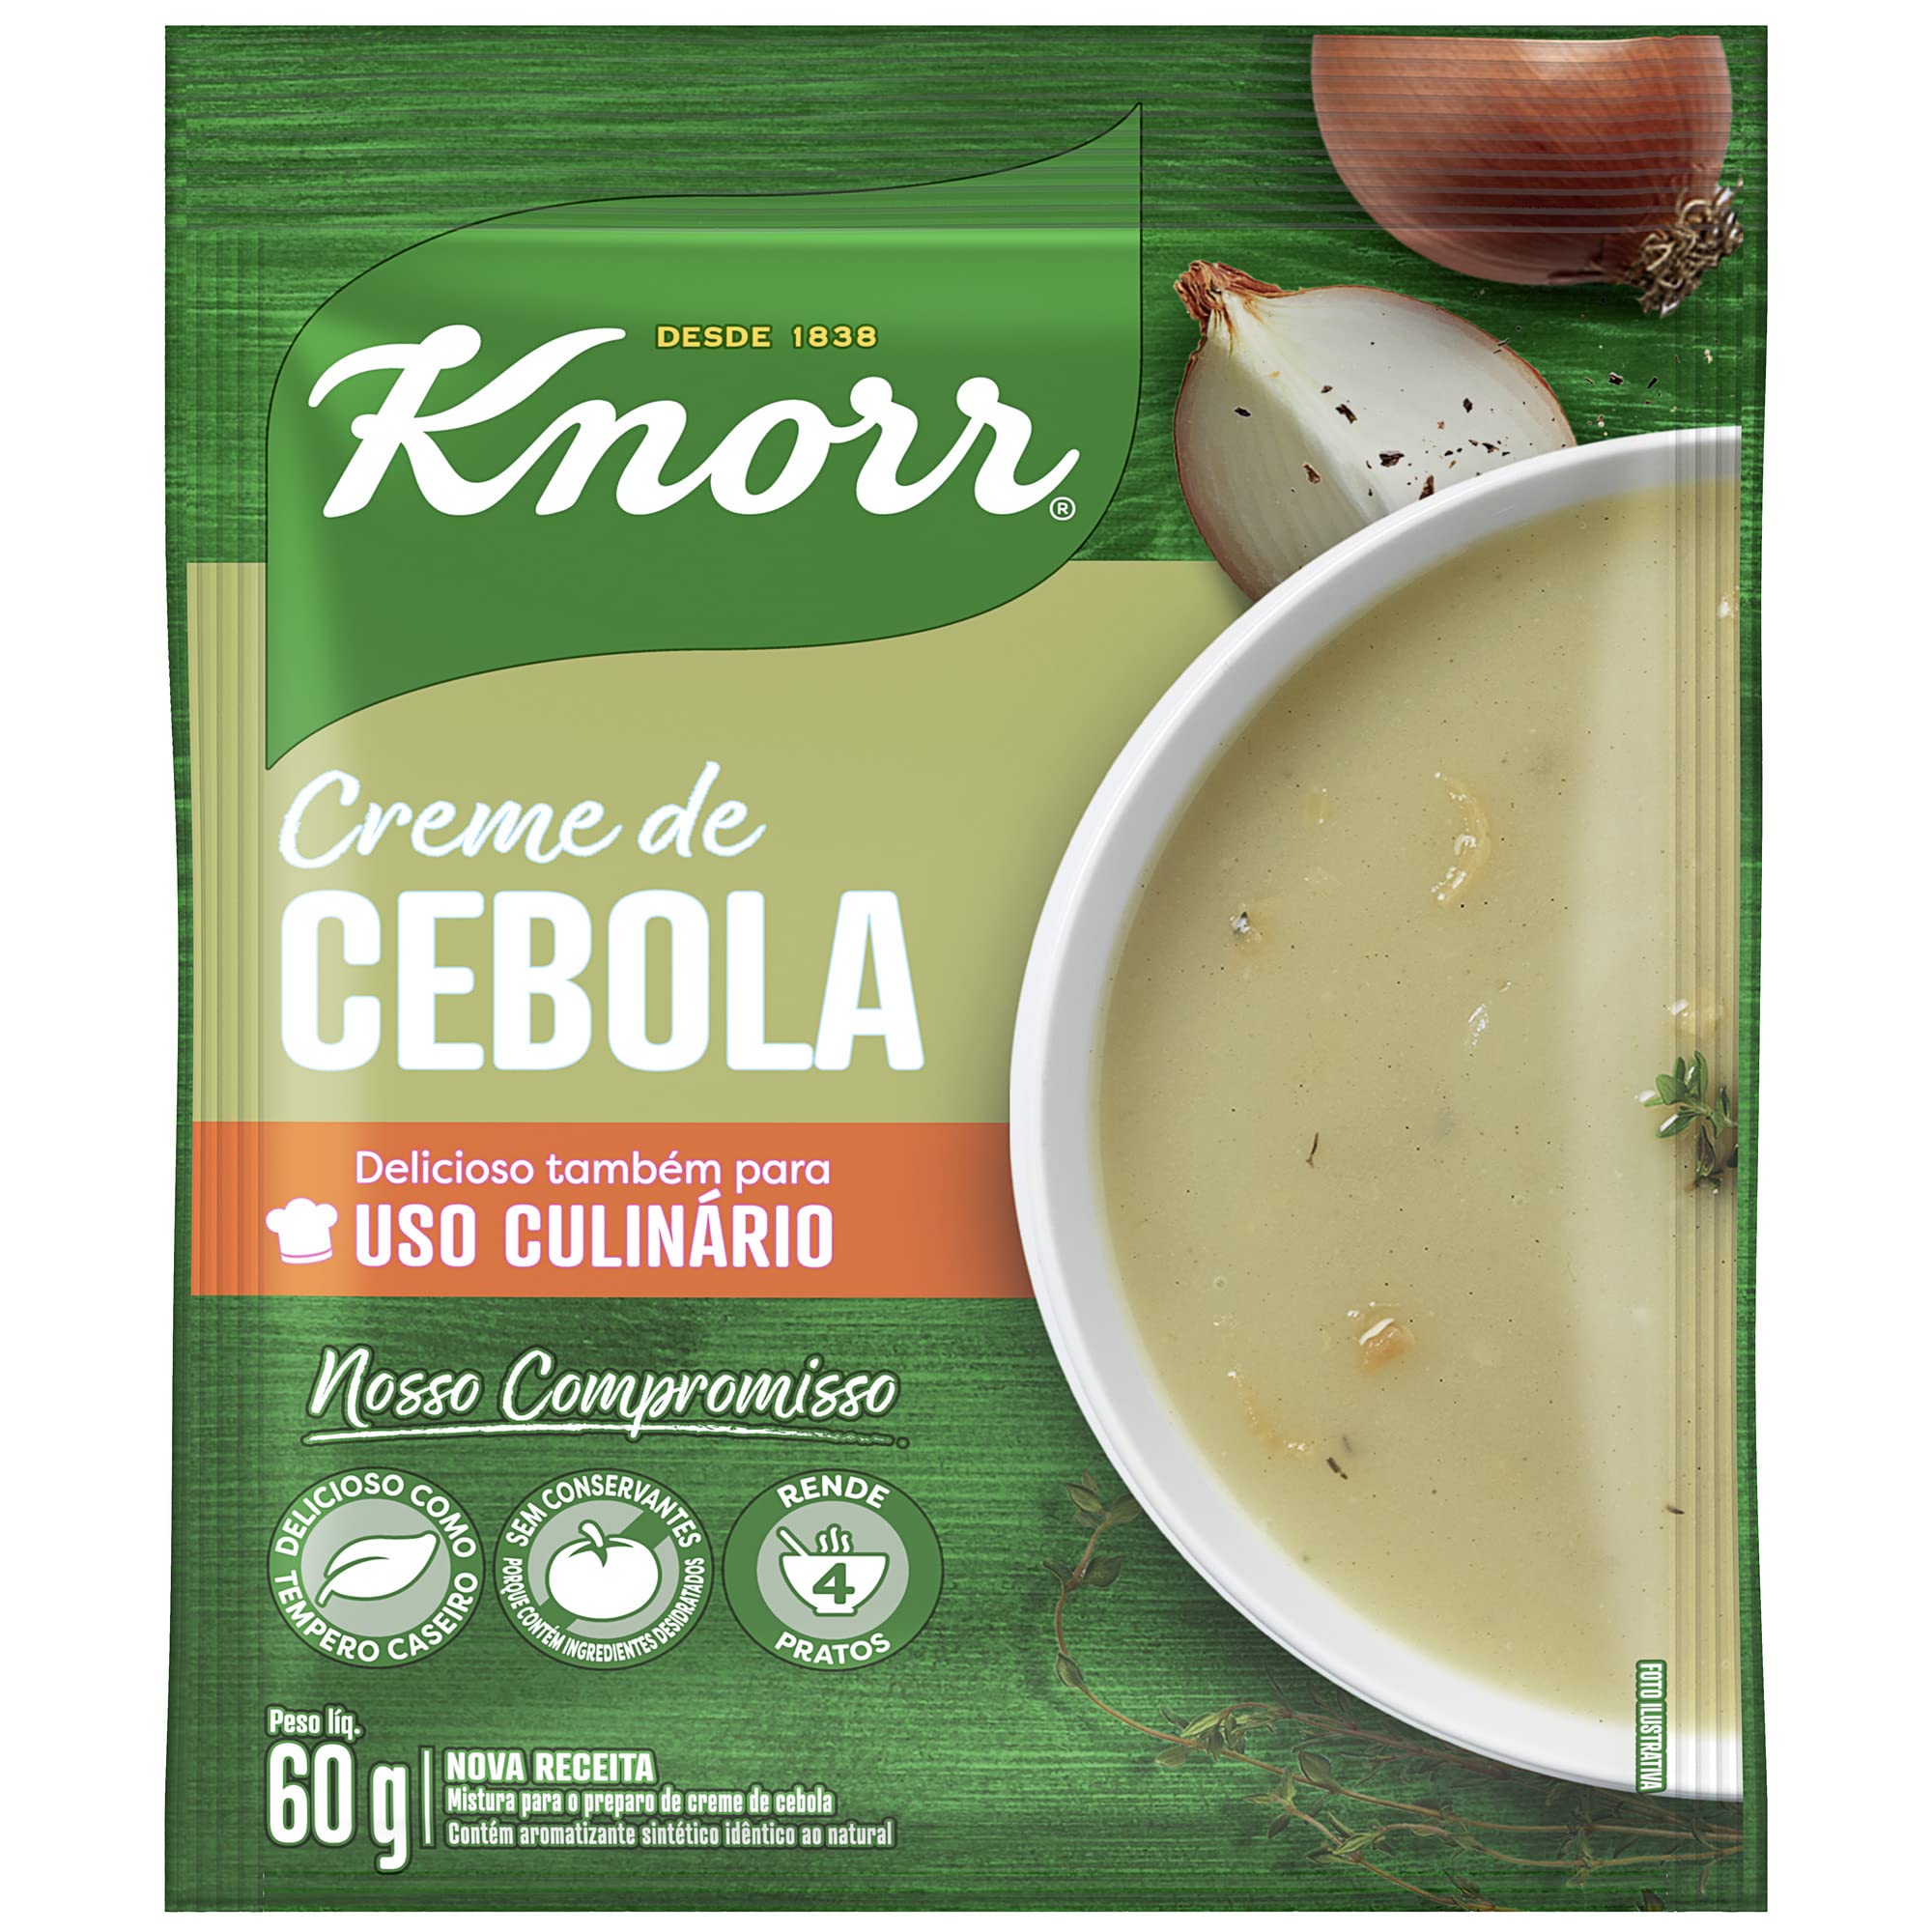 KNORR – Onion Cream Soup - 60g - FINAL SALE - EXPIRED or CLOSE TO EXPIRY